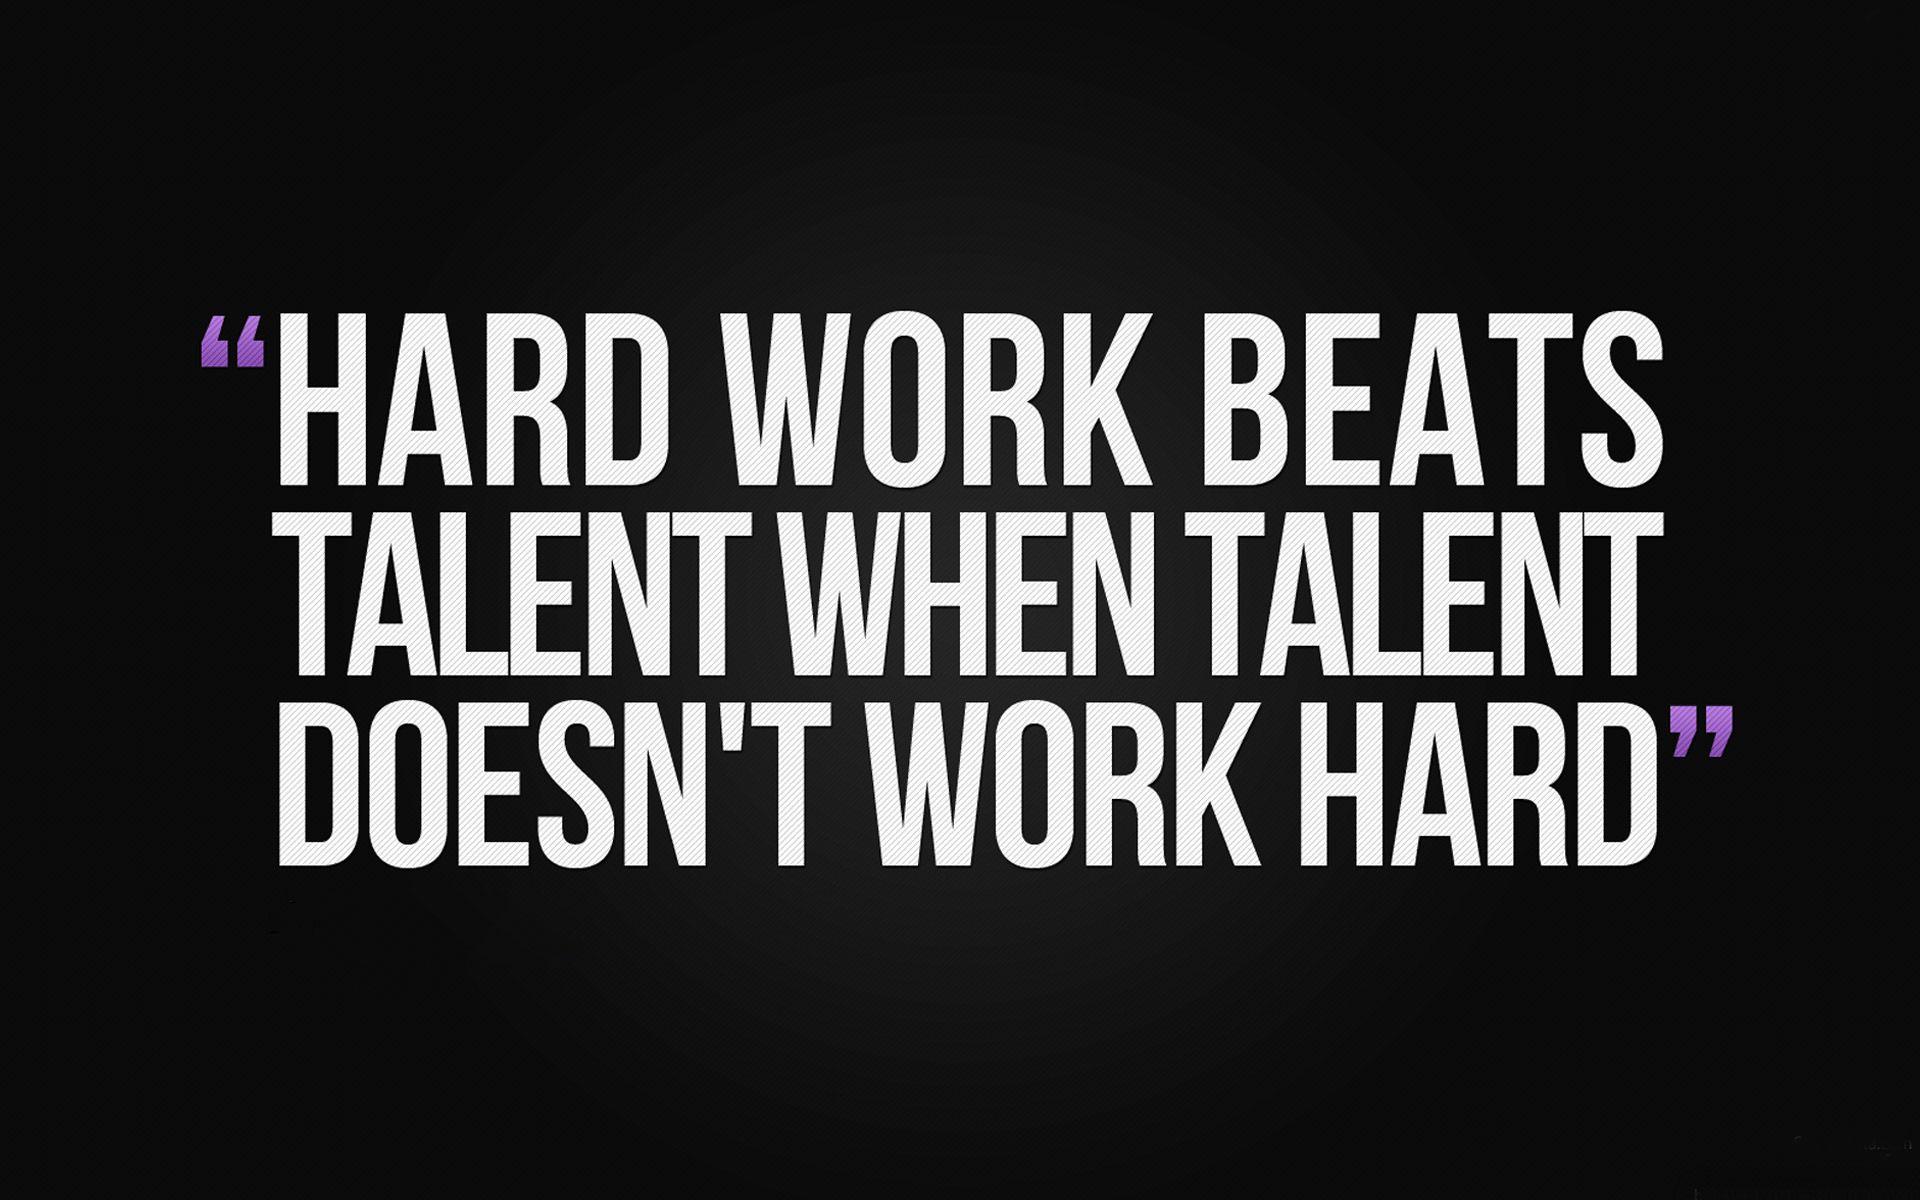 Quotes Work Hard Iphone Wallpapers - Top Free Quotes Work Hard Iphone